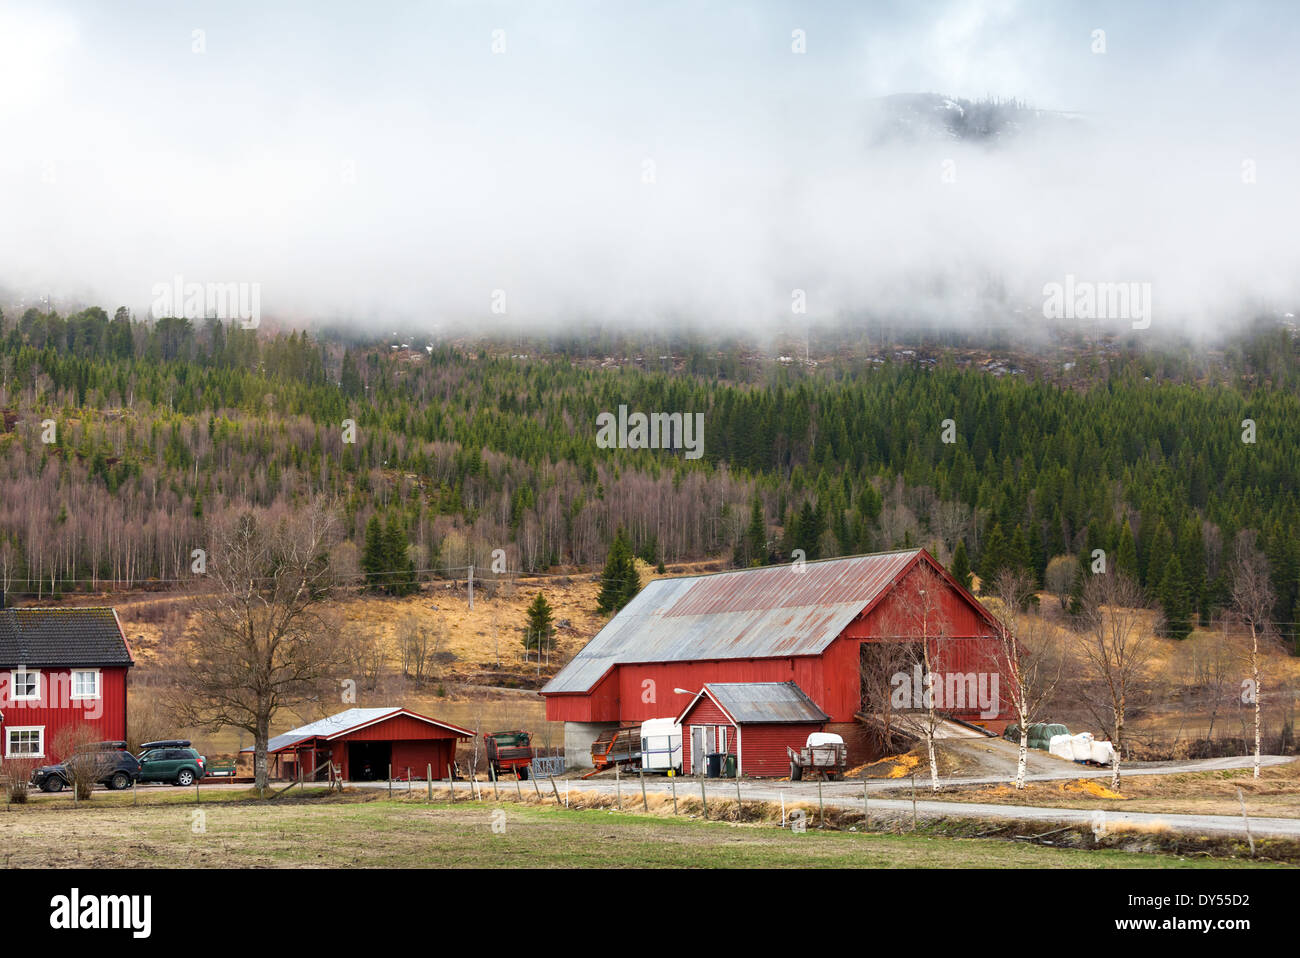 Rural Norwegian landscape with red wooden houses and clouds on hills Stock Photo